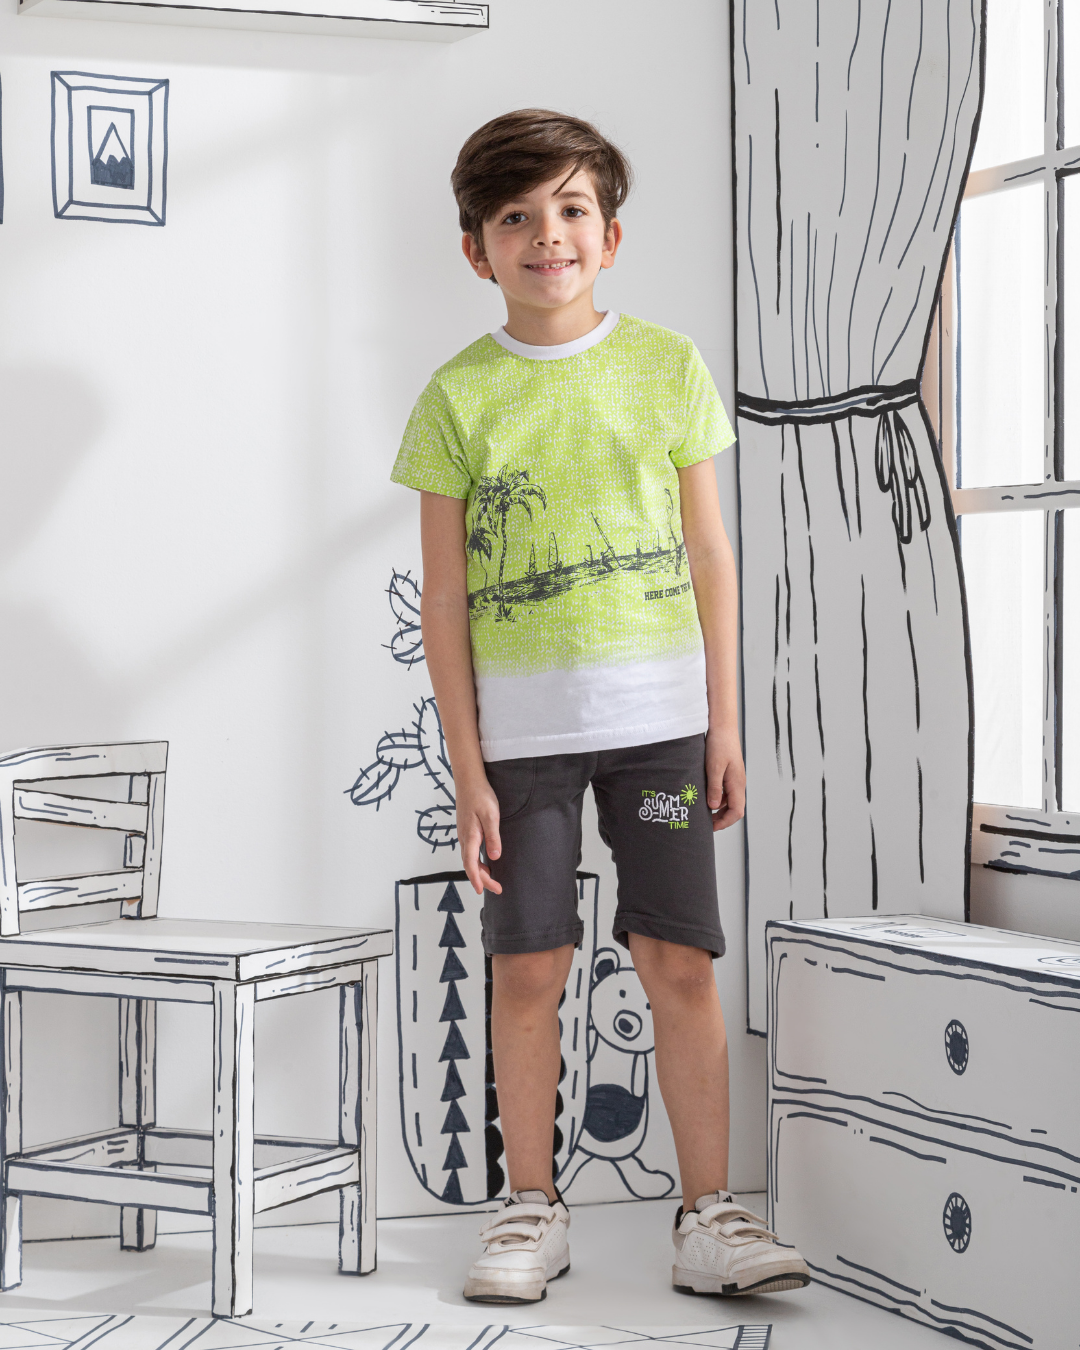 HERE COME THE WAVES Boys' pajamas, half-sleeve palm print T-shirt and shorts